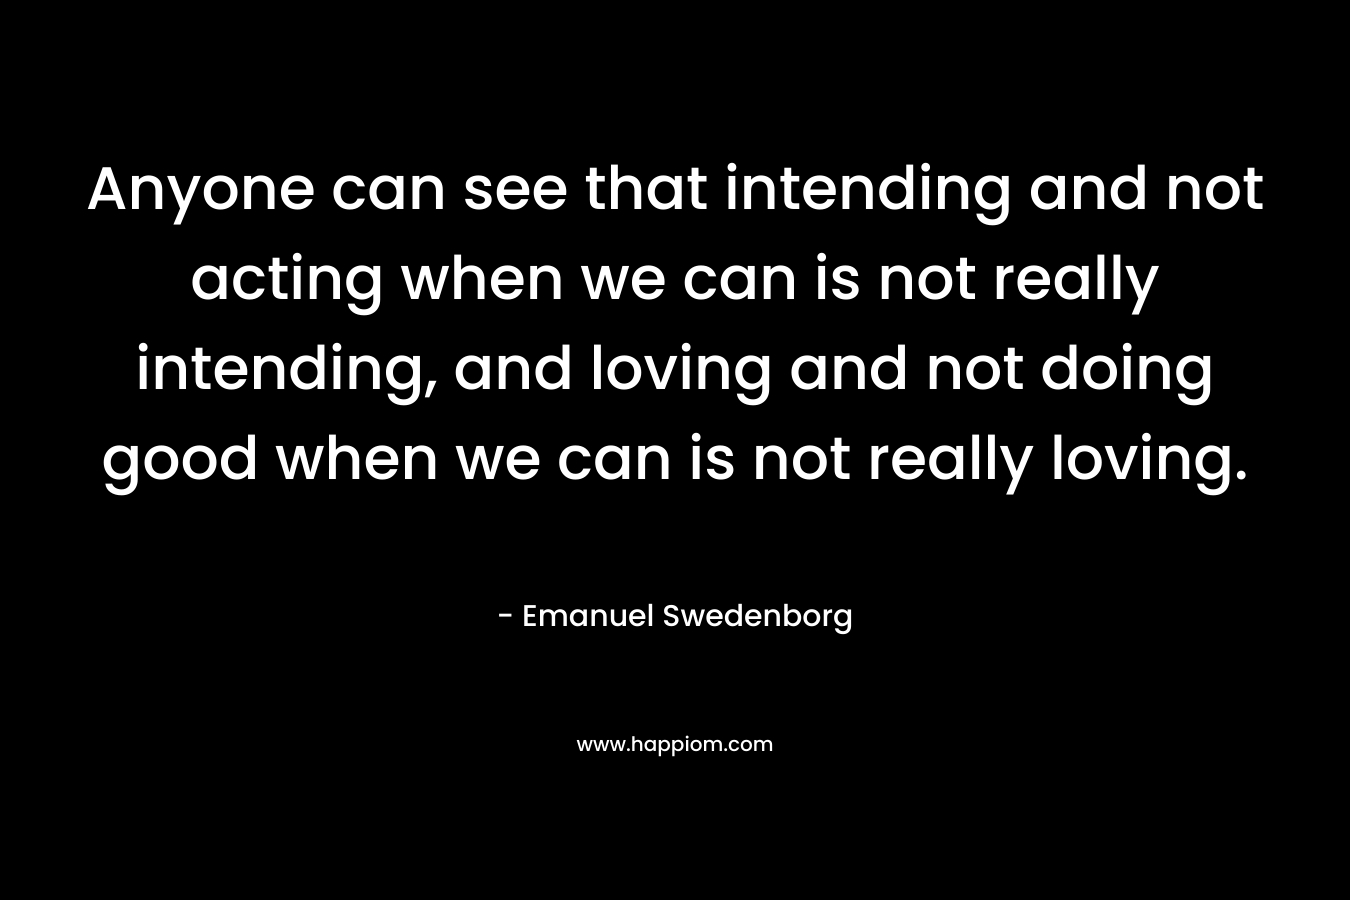 Anyone can see that intending and not acting when we can is not really intending, and loving and not doing good when we can is not really loving.